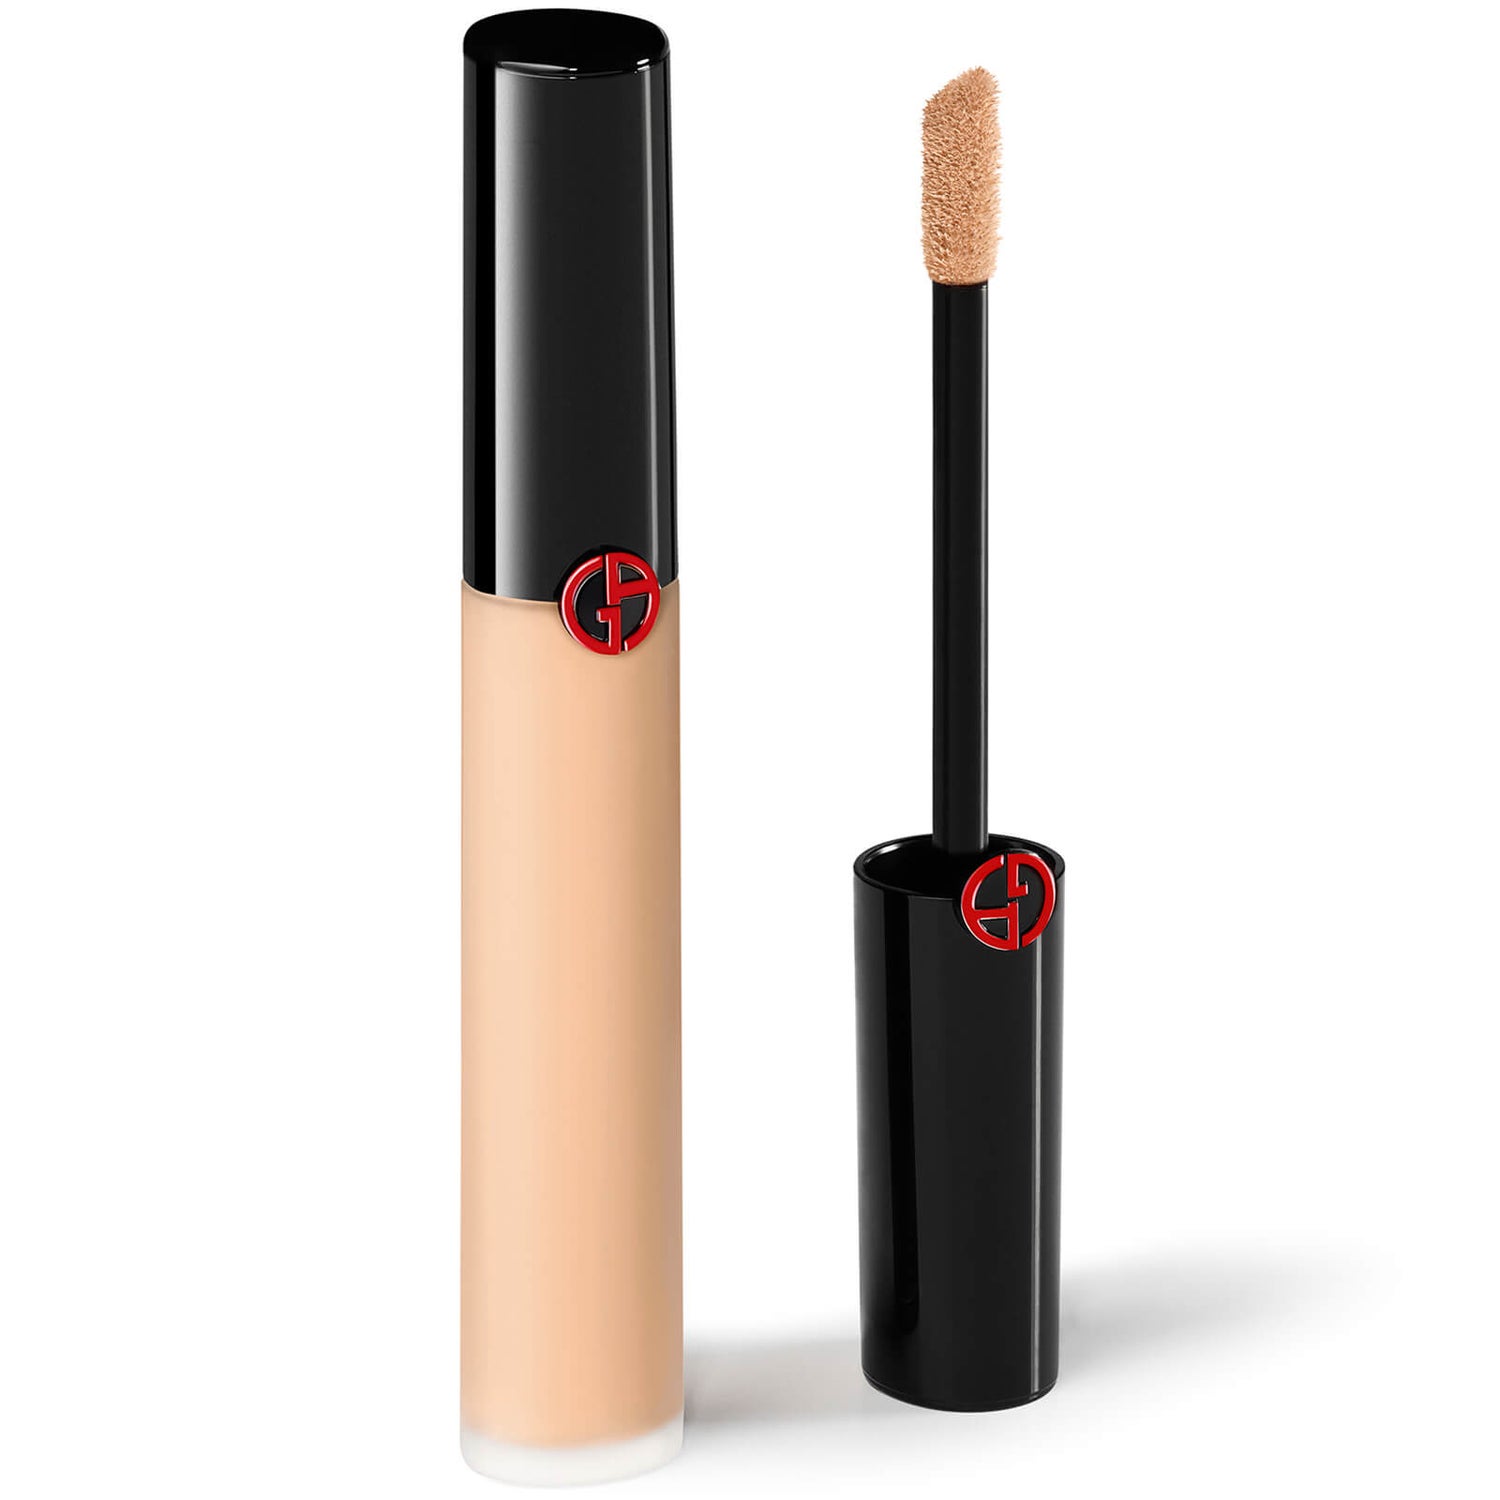 Armani Power Fabric Concealer 30g (Various Shades)